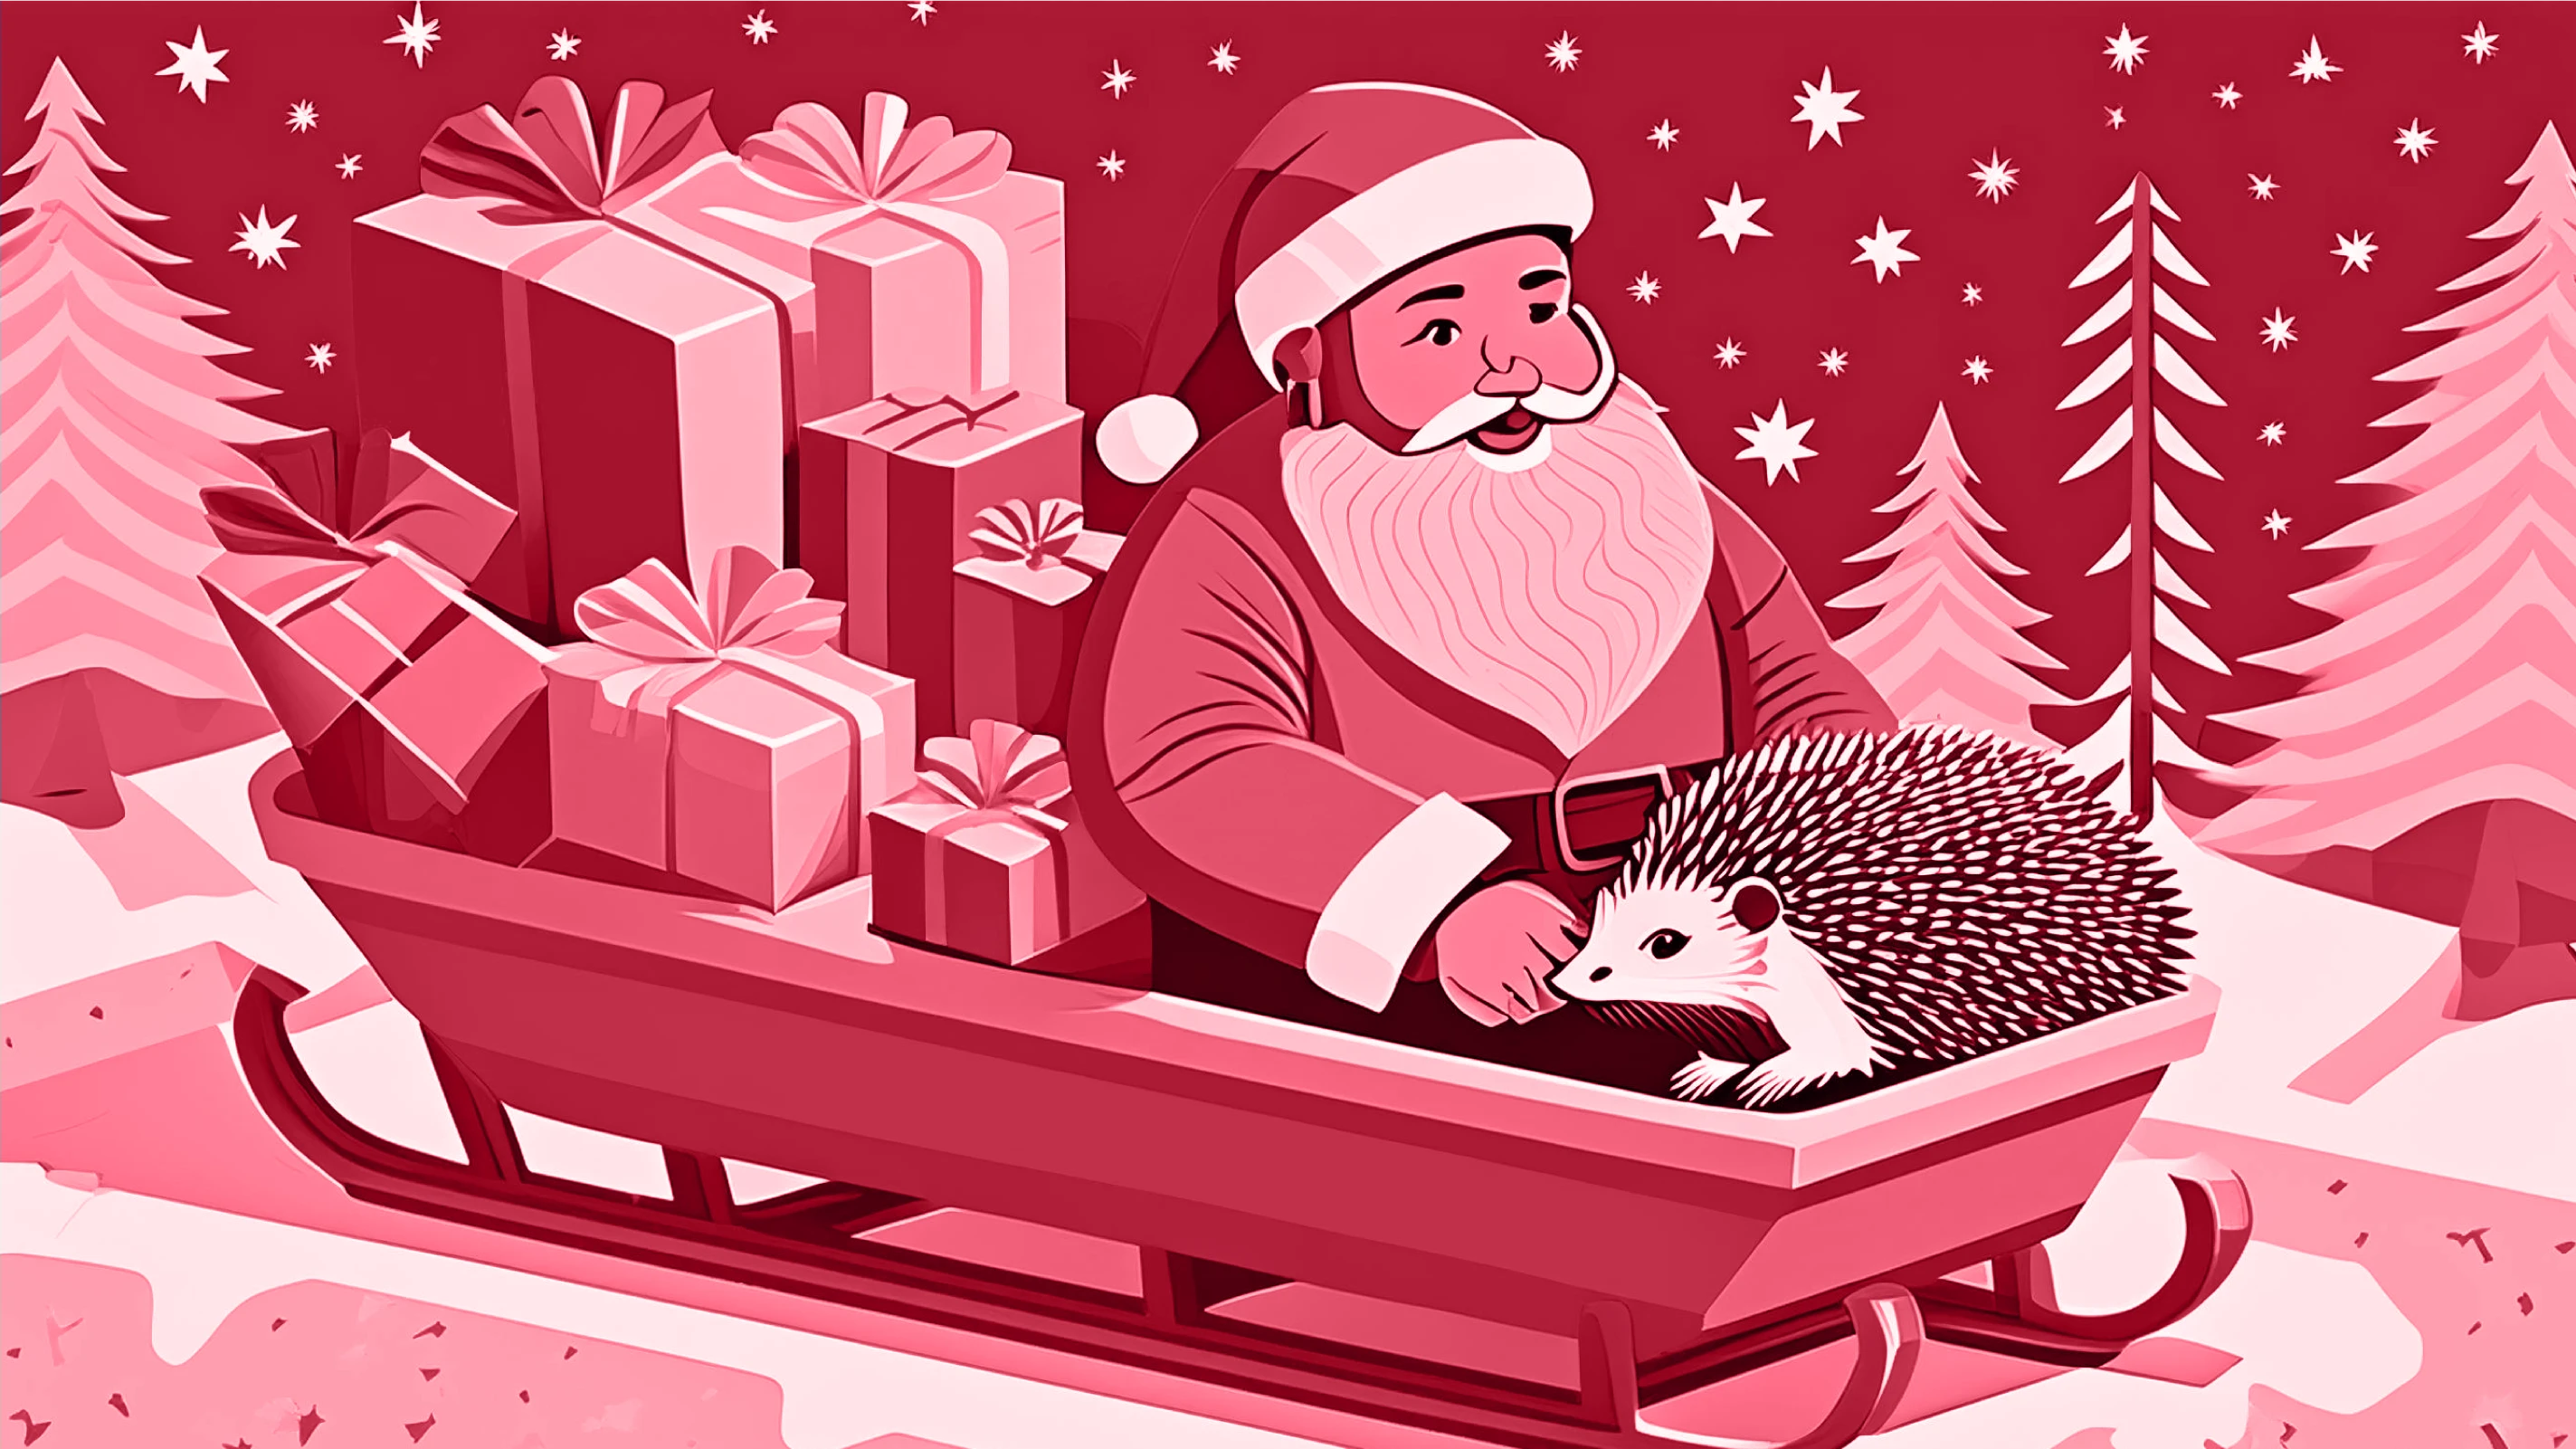 Look what Santa brought: another Hedgehog software release!